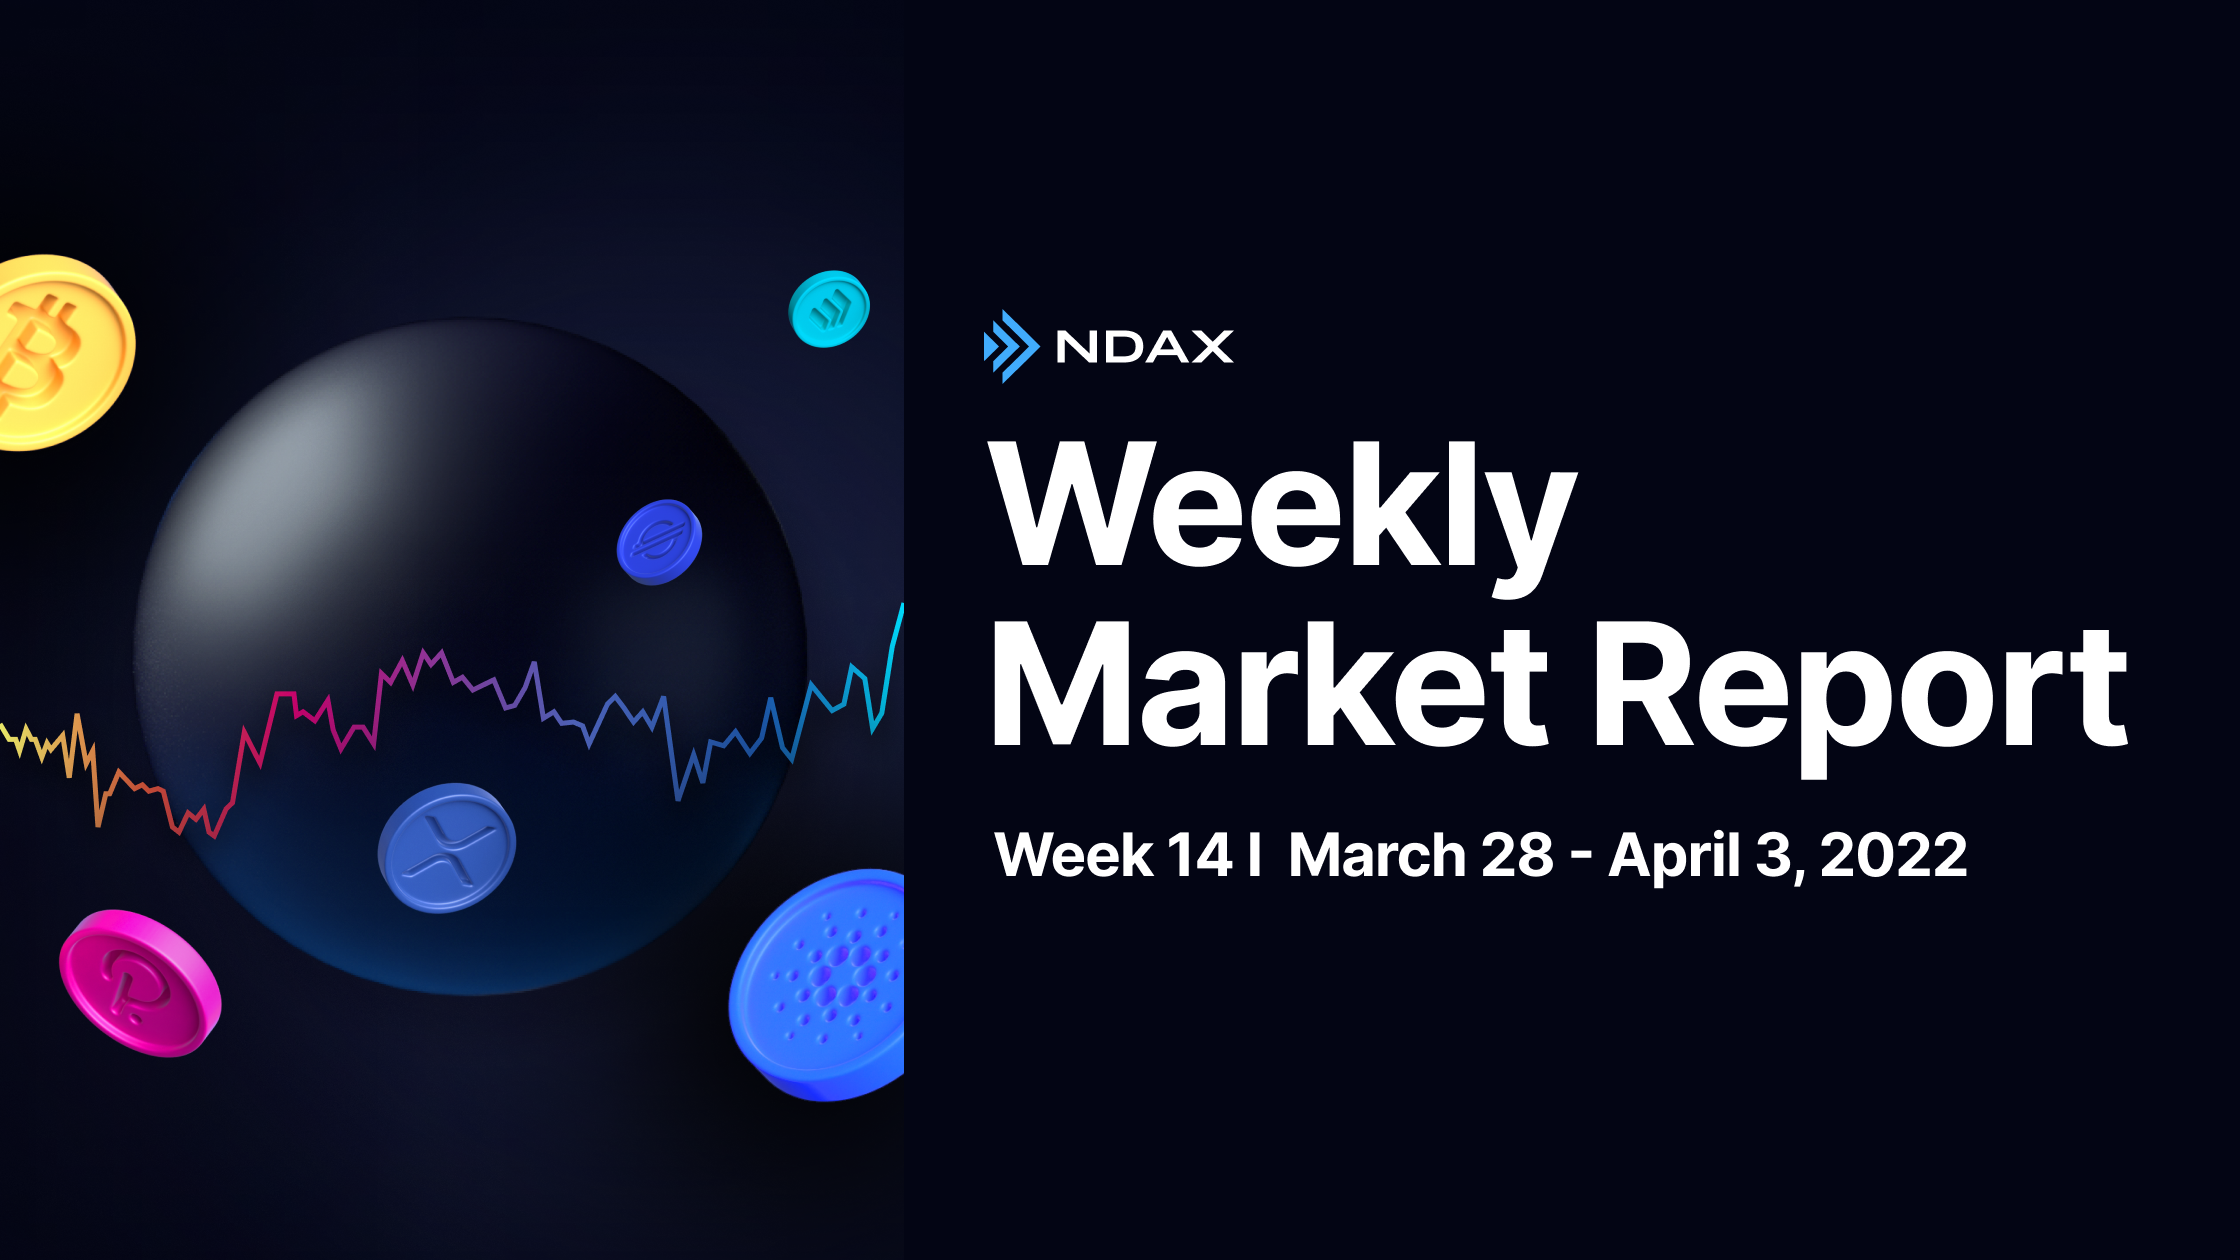 Weekly Crypto Market Report: March 28 - April 3, 2022 - BTC, ETH, COMP, AAVE & More